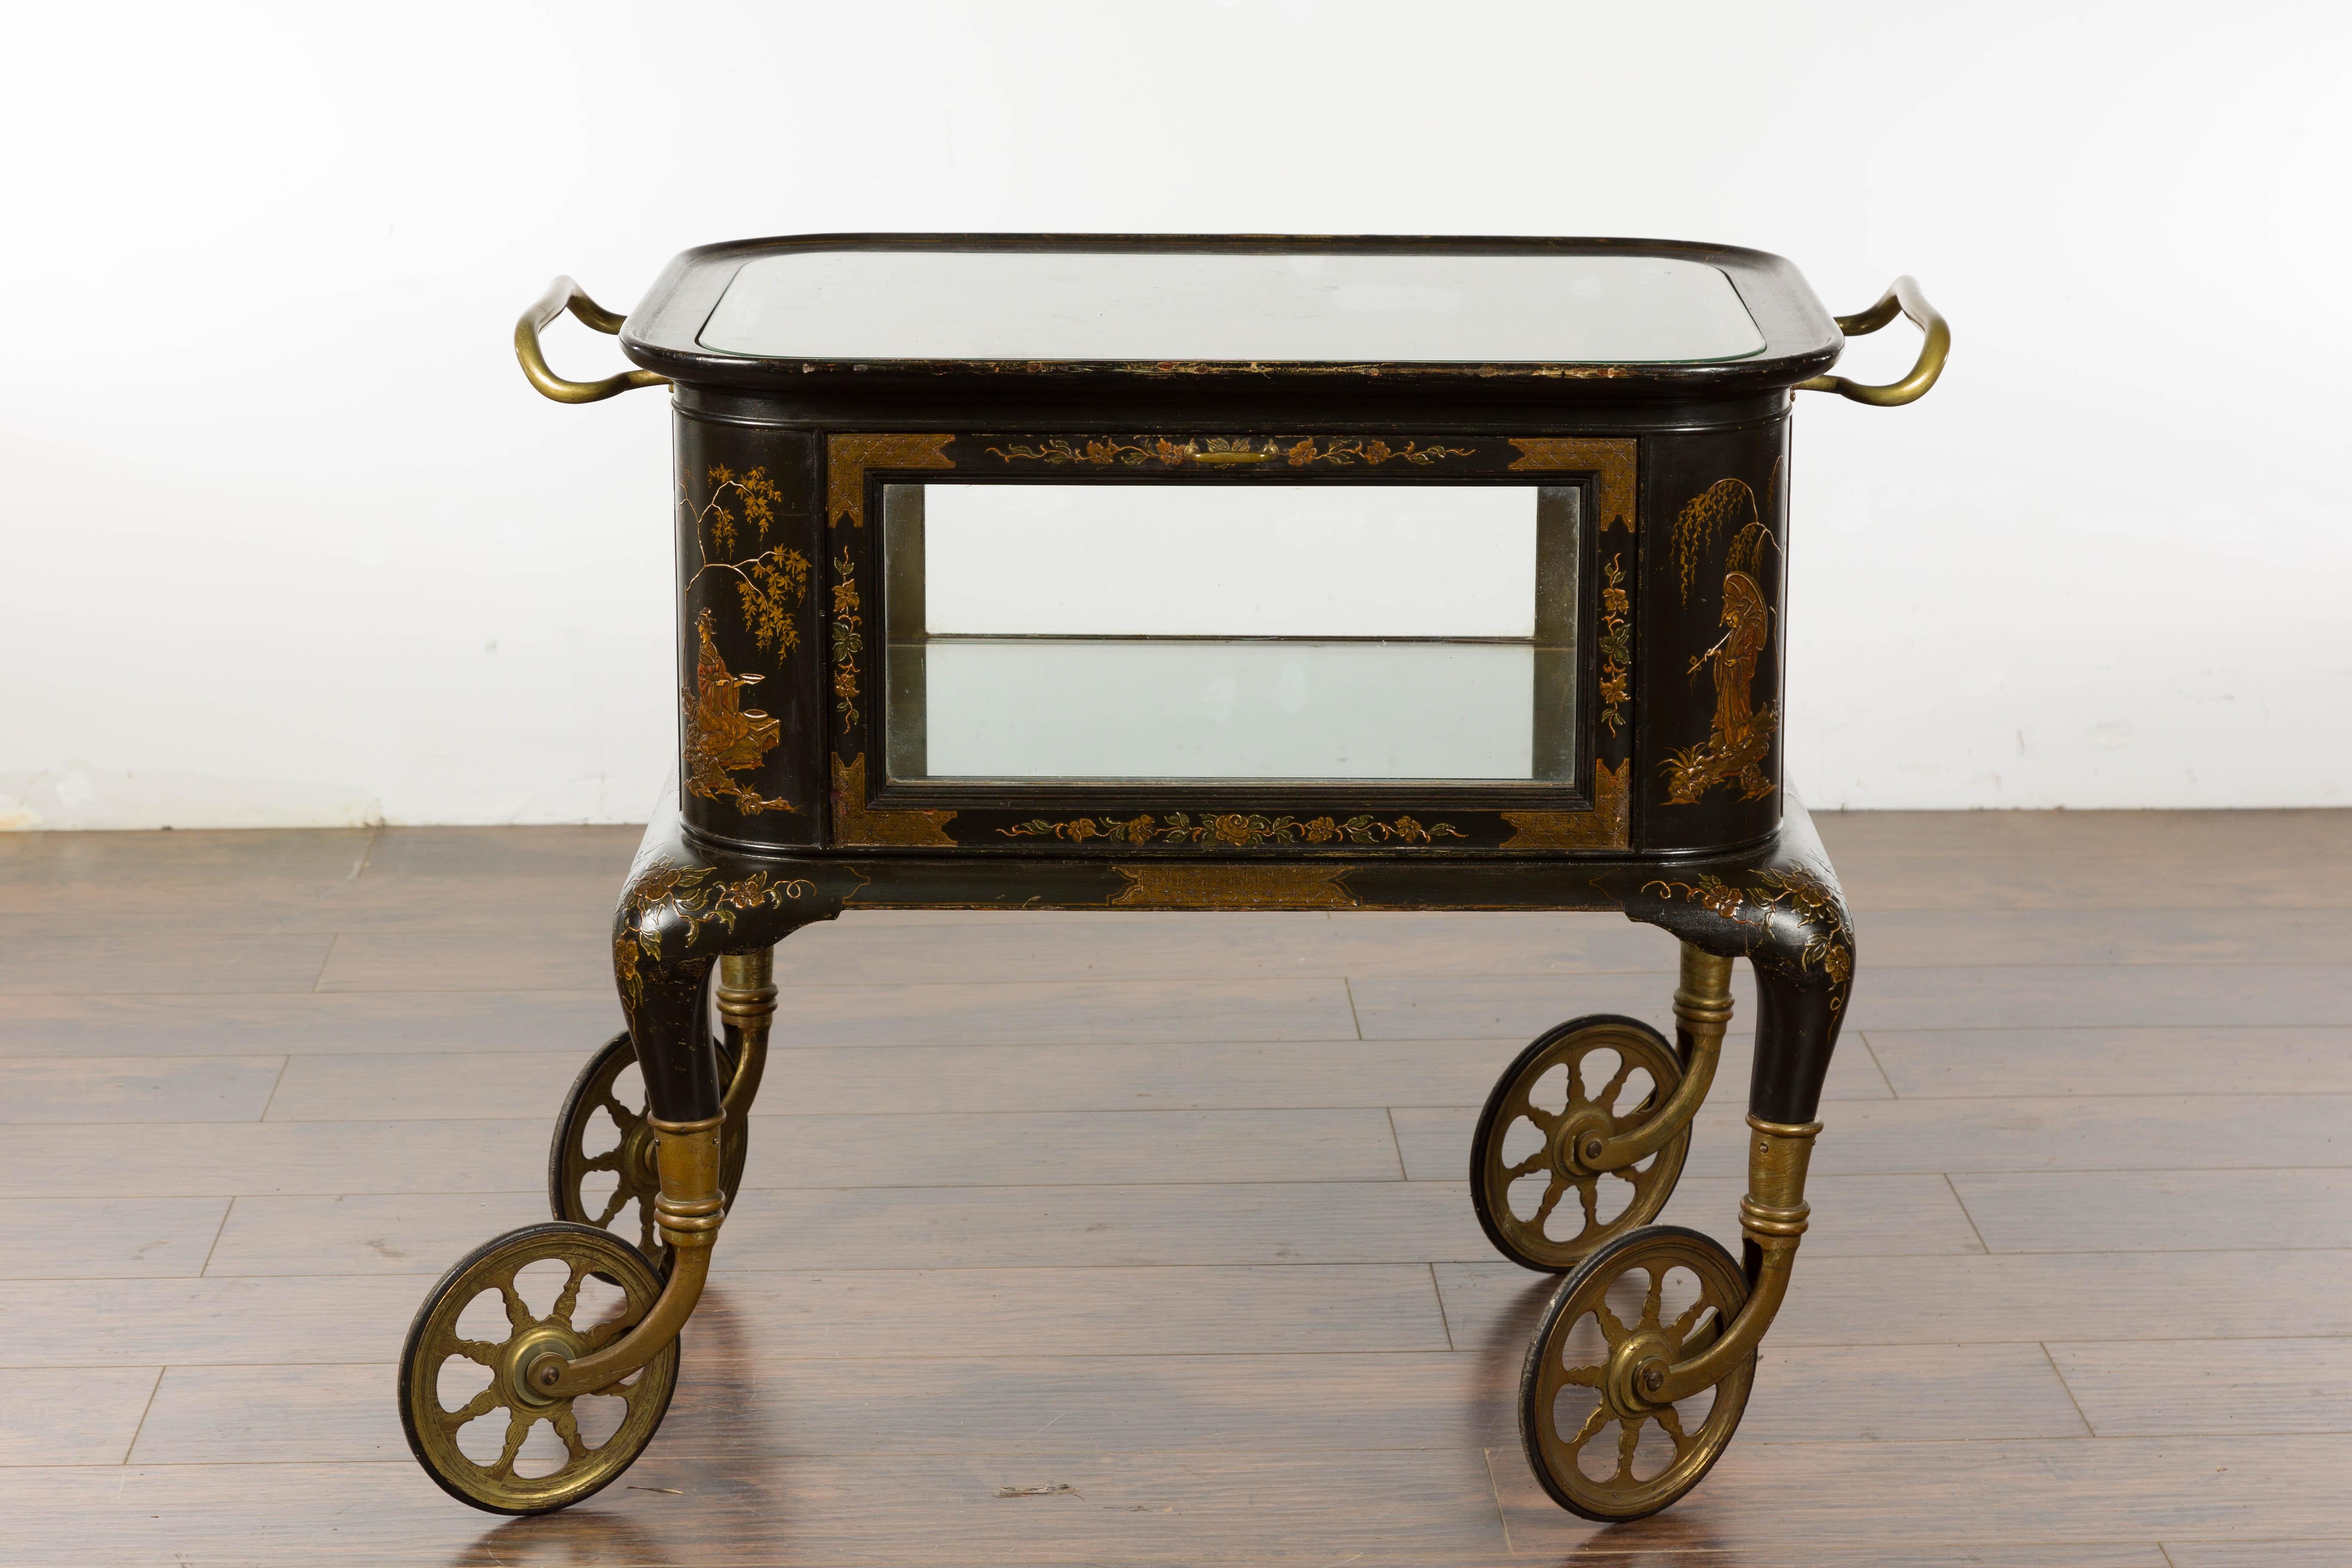 An English black and gold japanned bar cart from the 19th century with Chinoiserie décor depicting figures in landscapes, glass top and sides, on brass wheels. Impress your guests with the sophistication of this 19th-century English black and gold